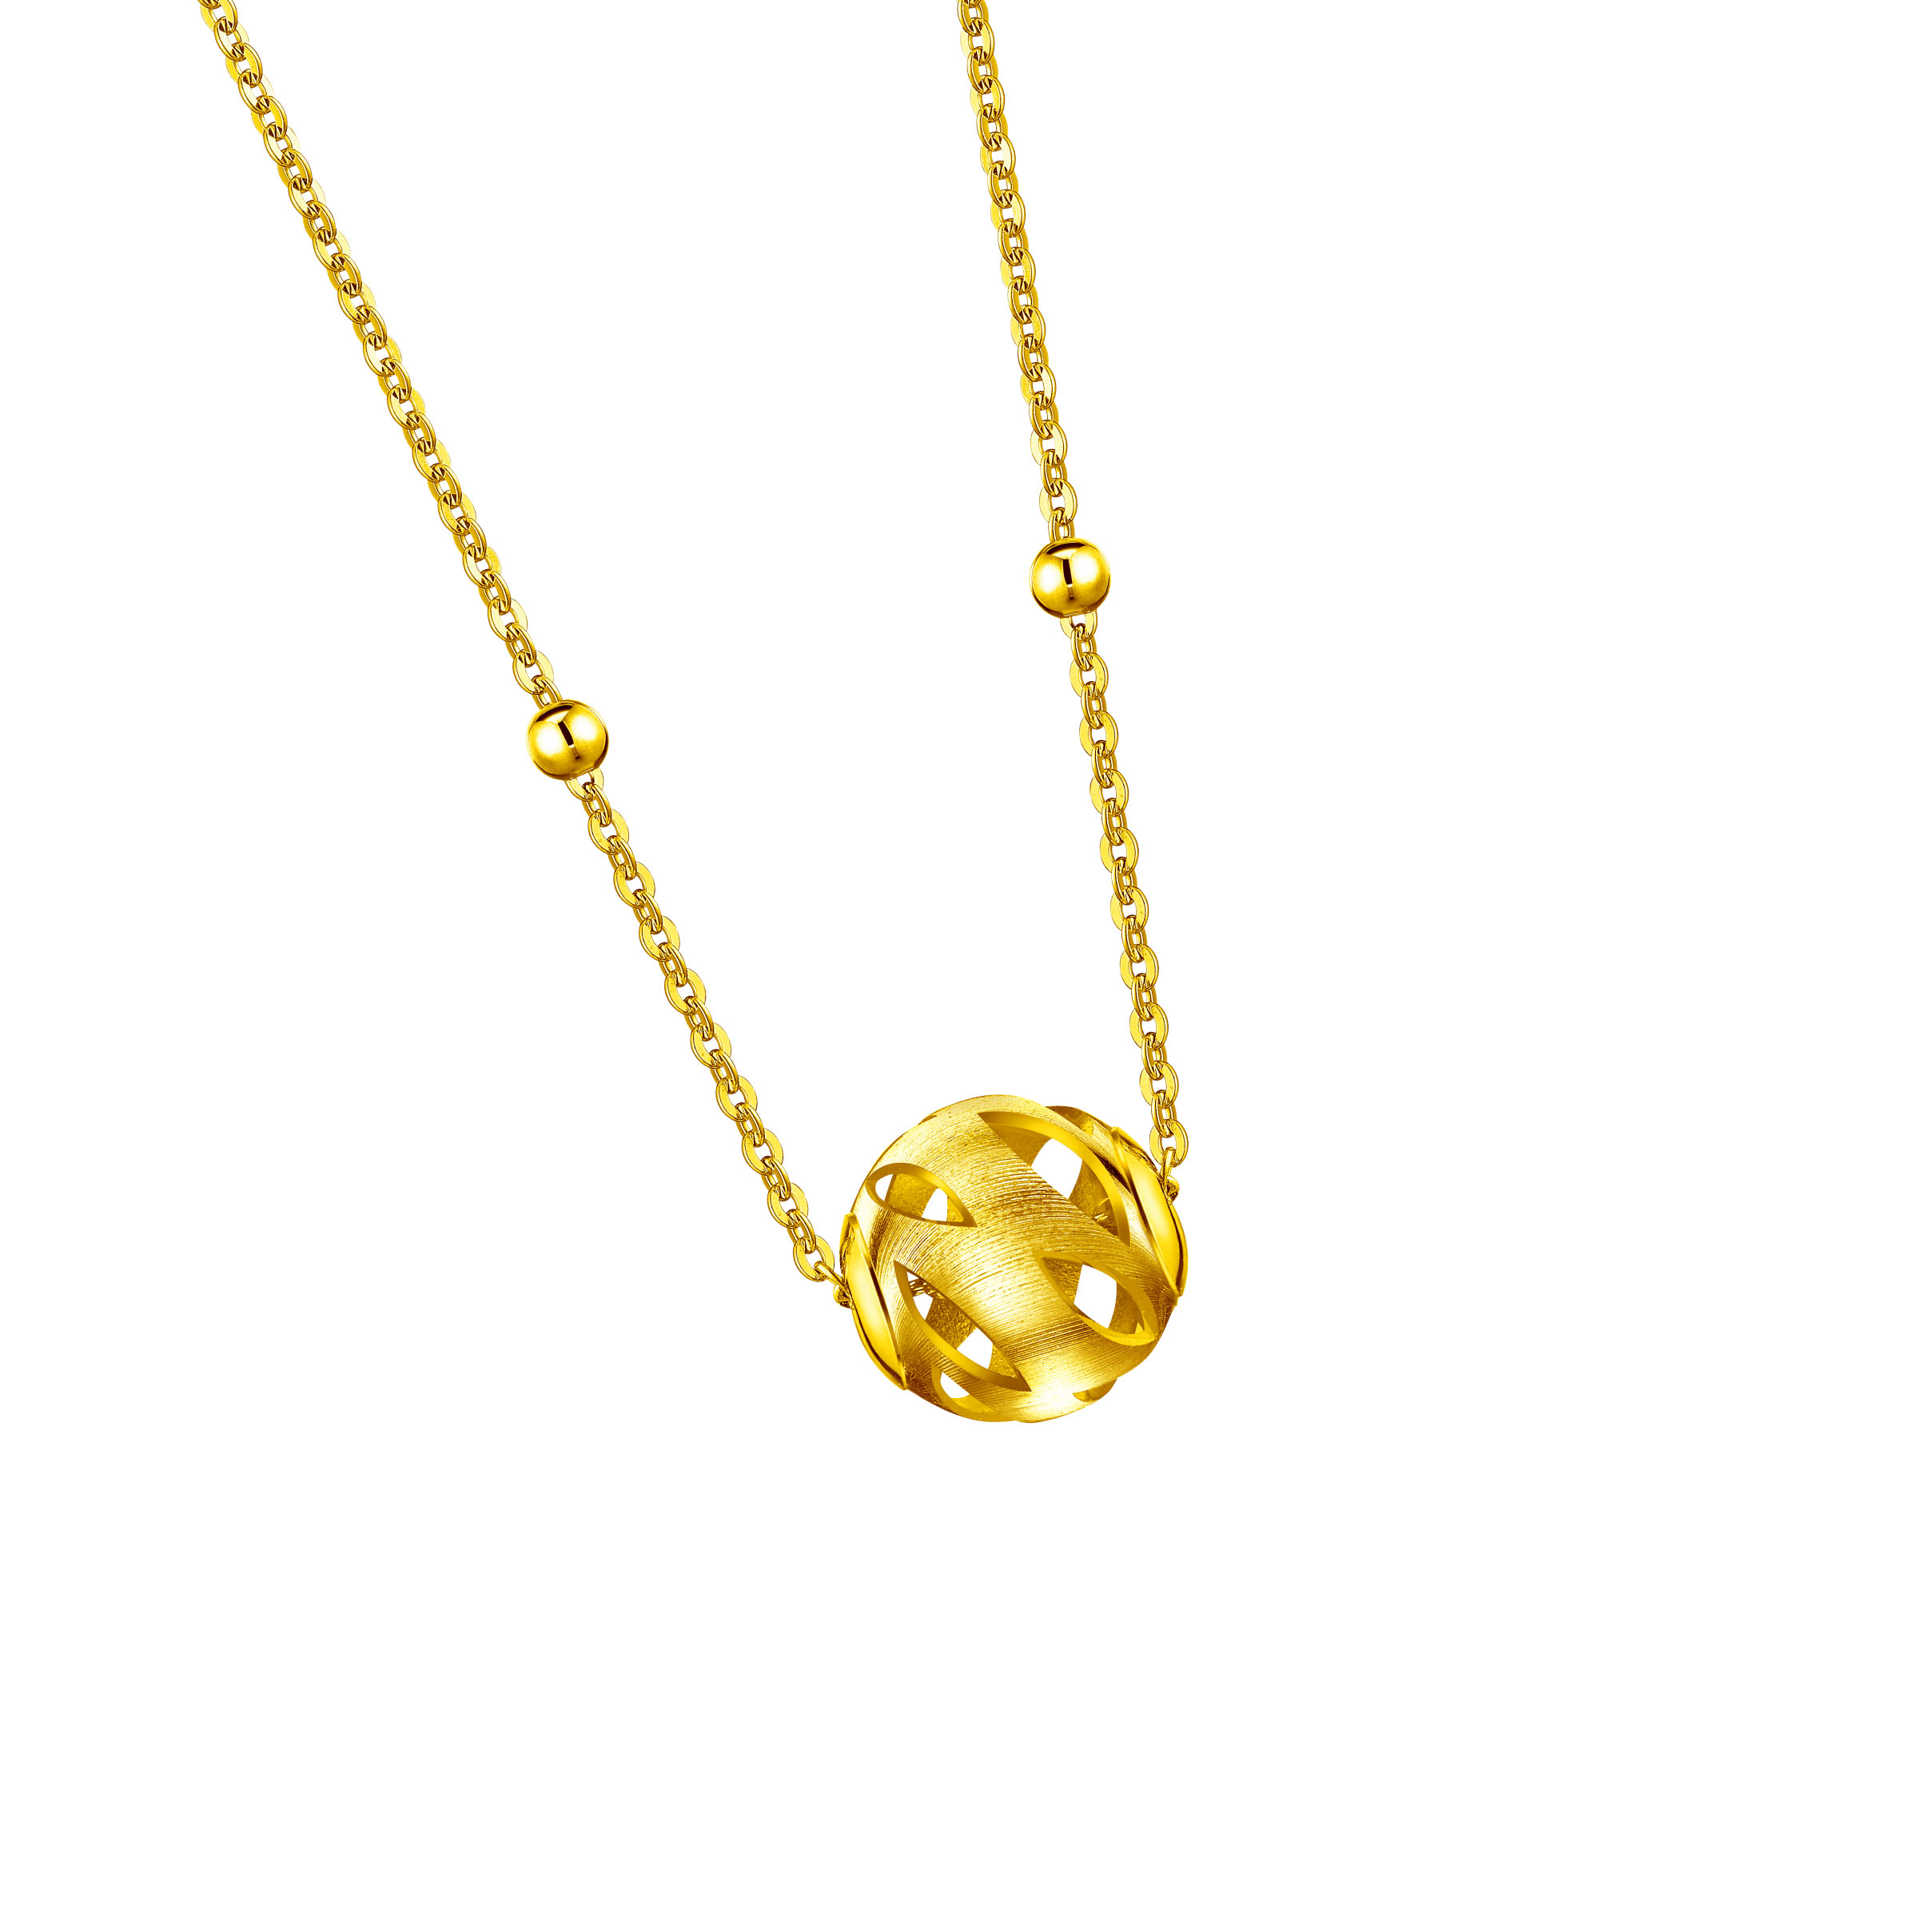 Goldstyle Planet Necklace